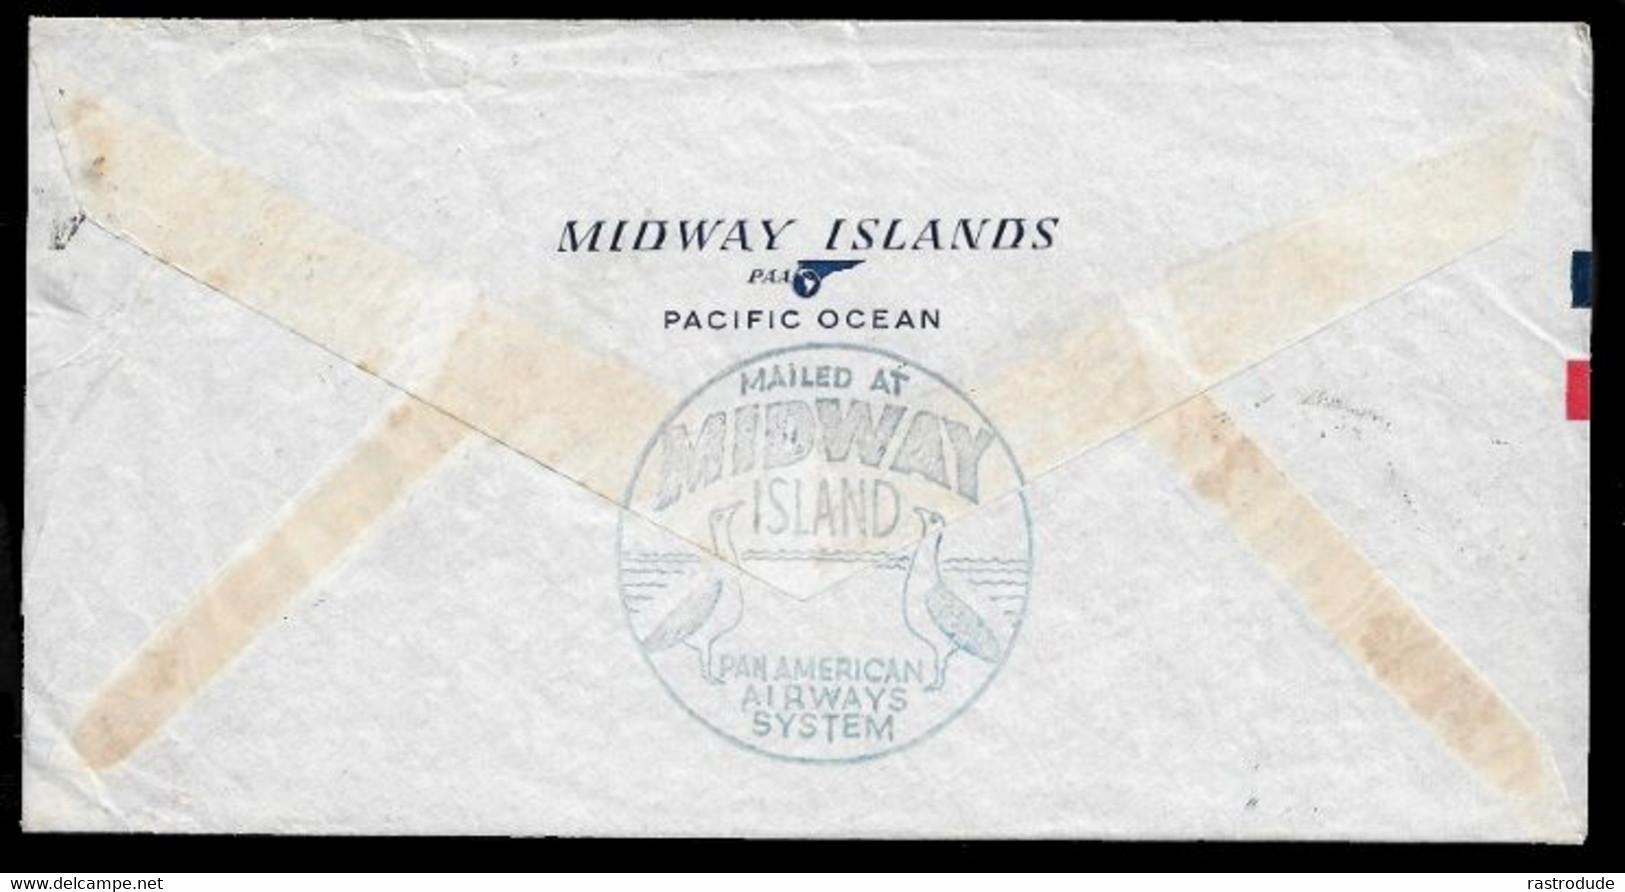 1941 AUG 15 - TRANSPACIFIC AIR MAIL - MAILED AT MIDWAY ISLANDS - PAN AMERICAN AIRWAYS SYSTEM To PRINCETON - RARE - 2a. 1941-1960 Gebraucht